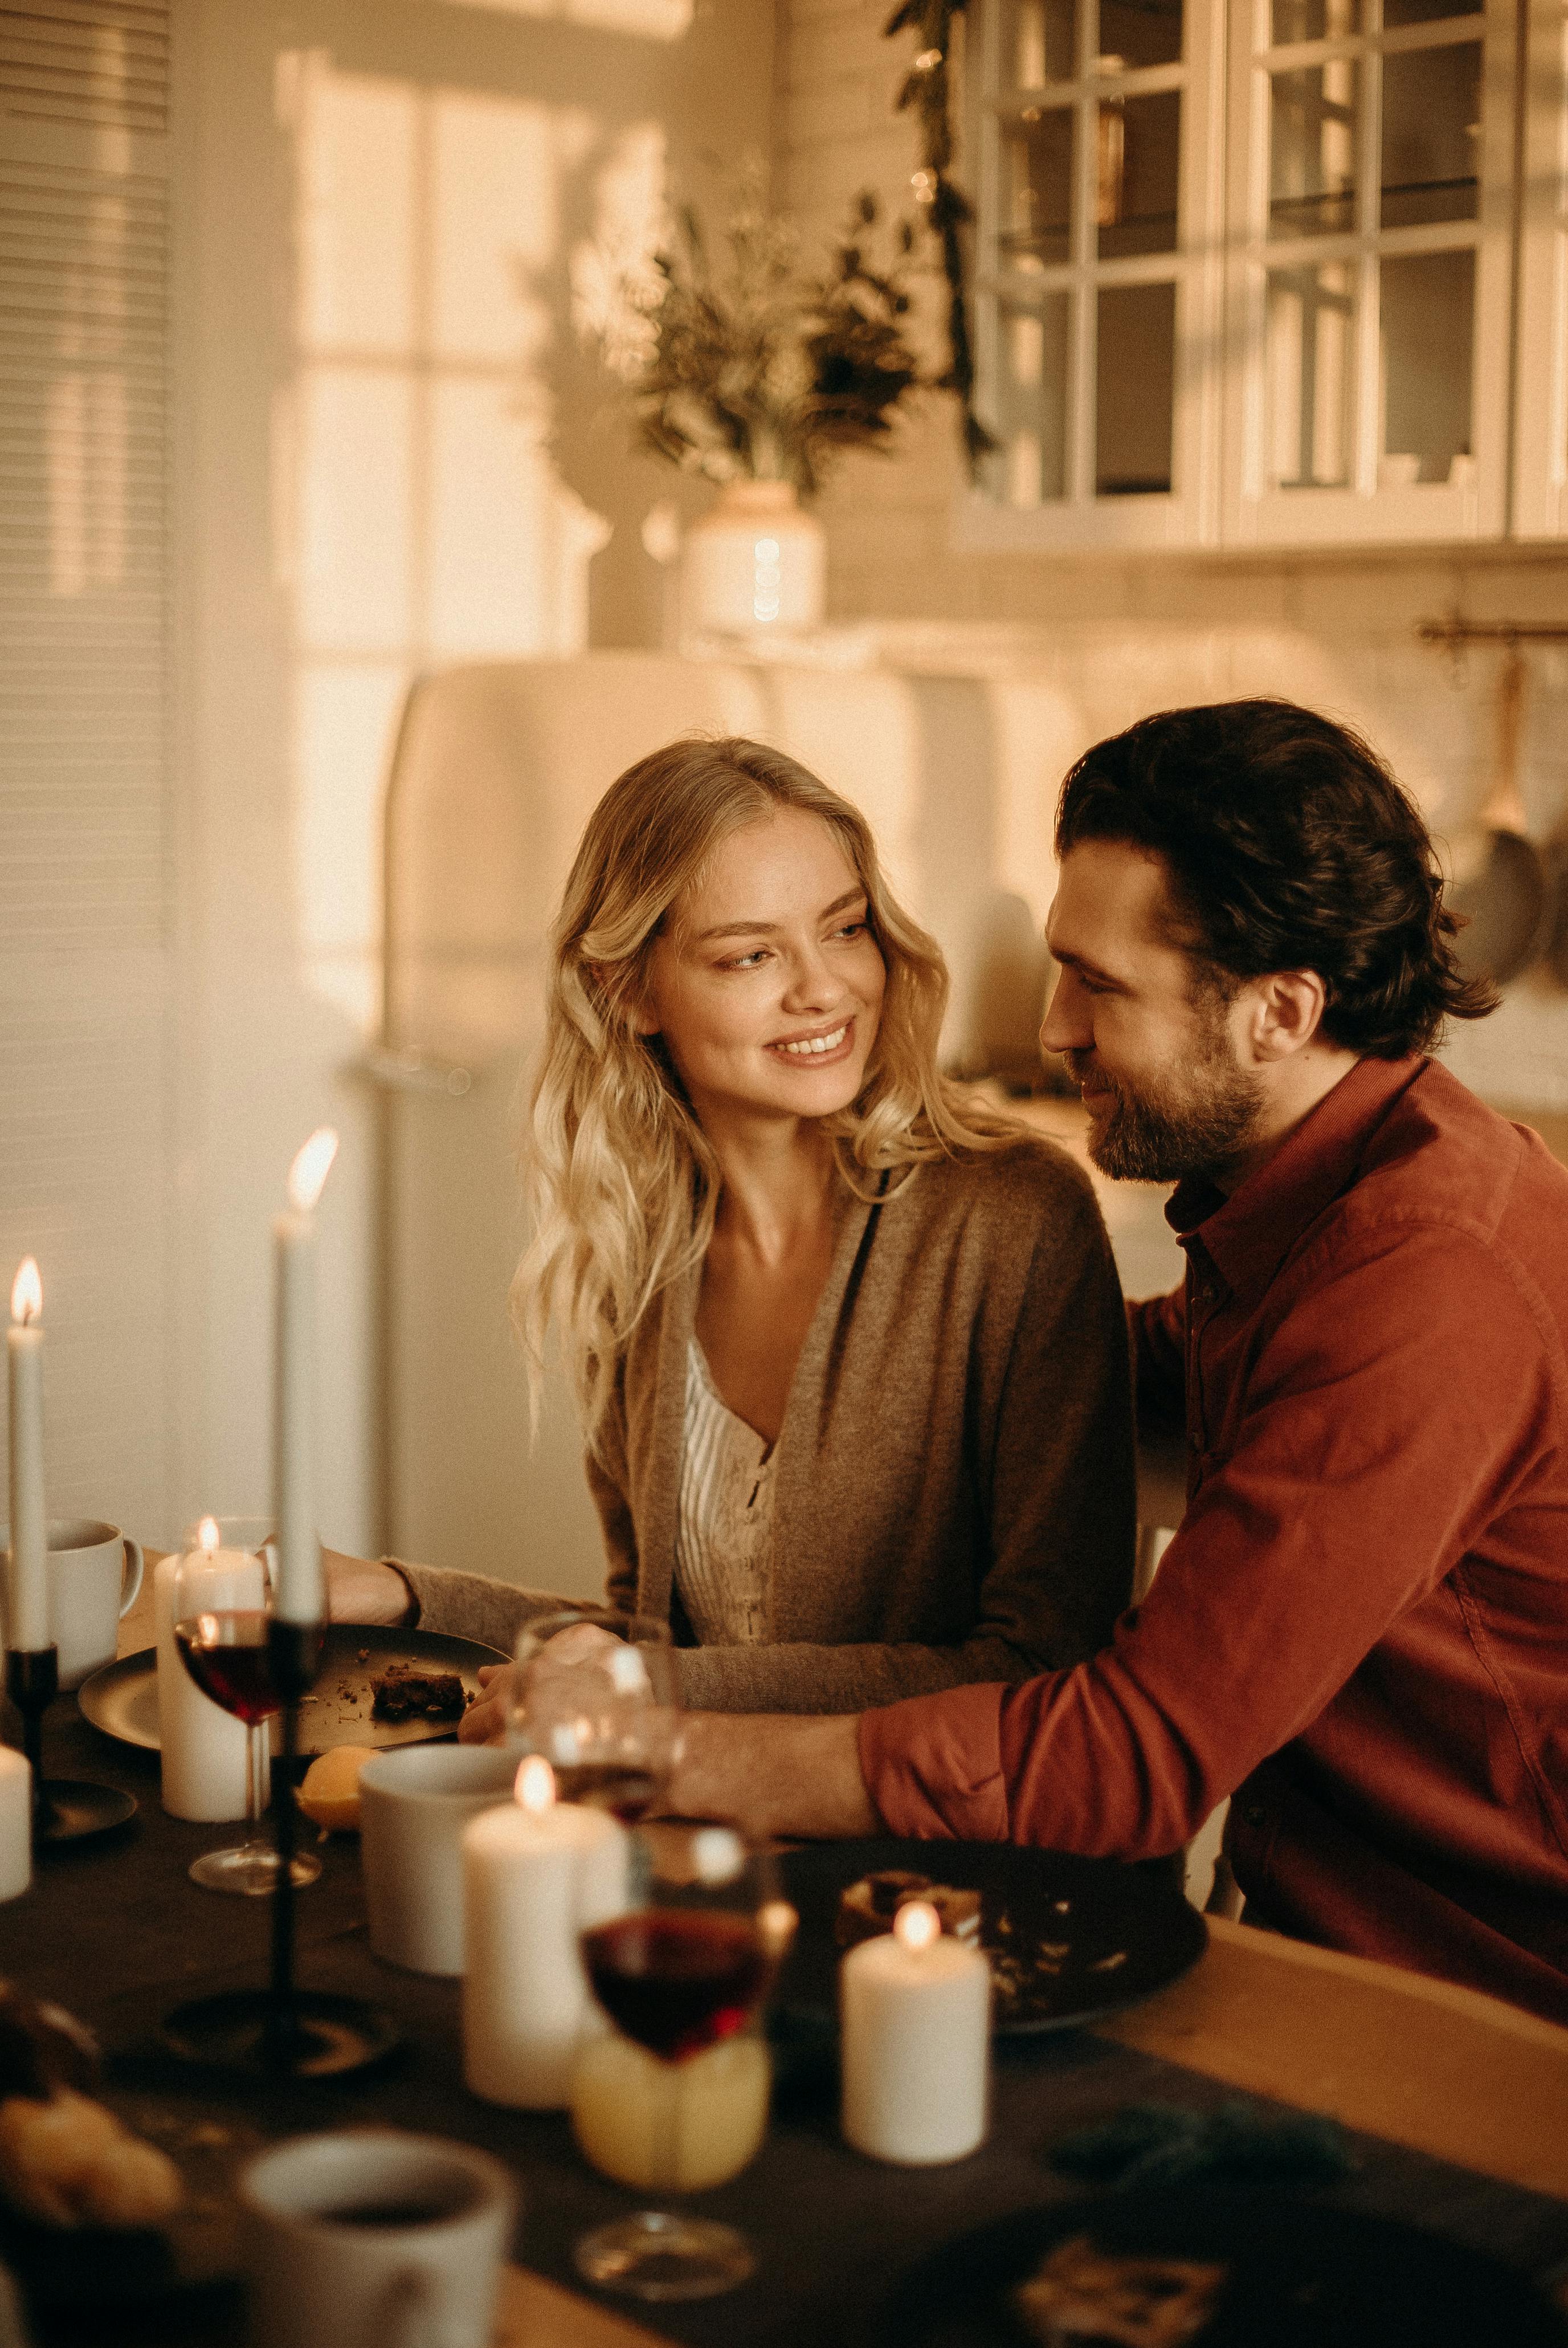 A happy couple enjoying drinks and a meal | Source: Pexels